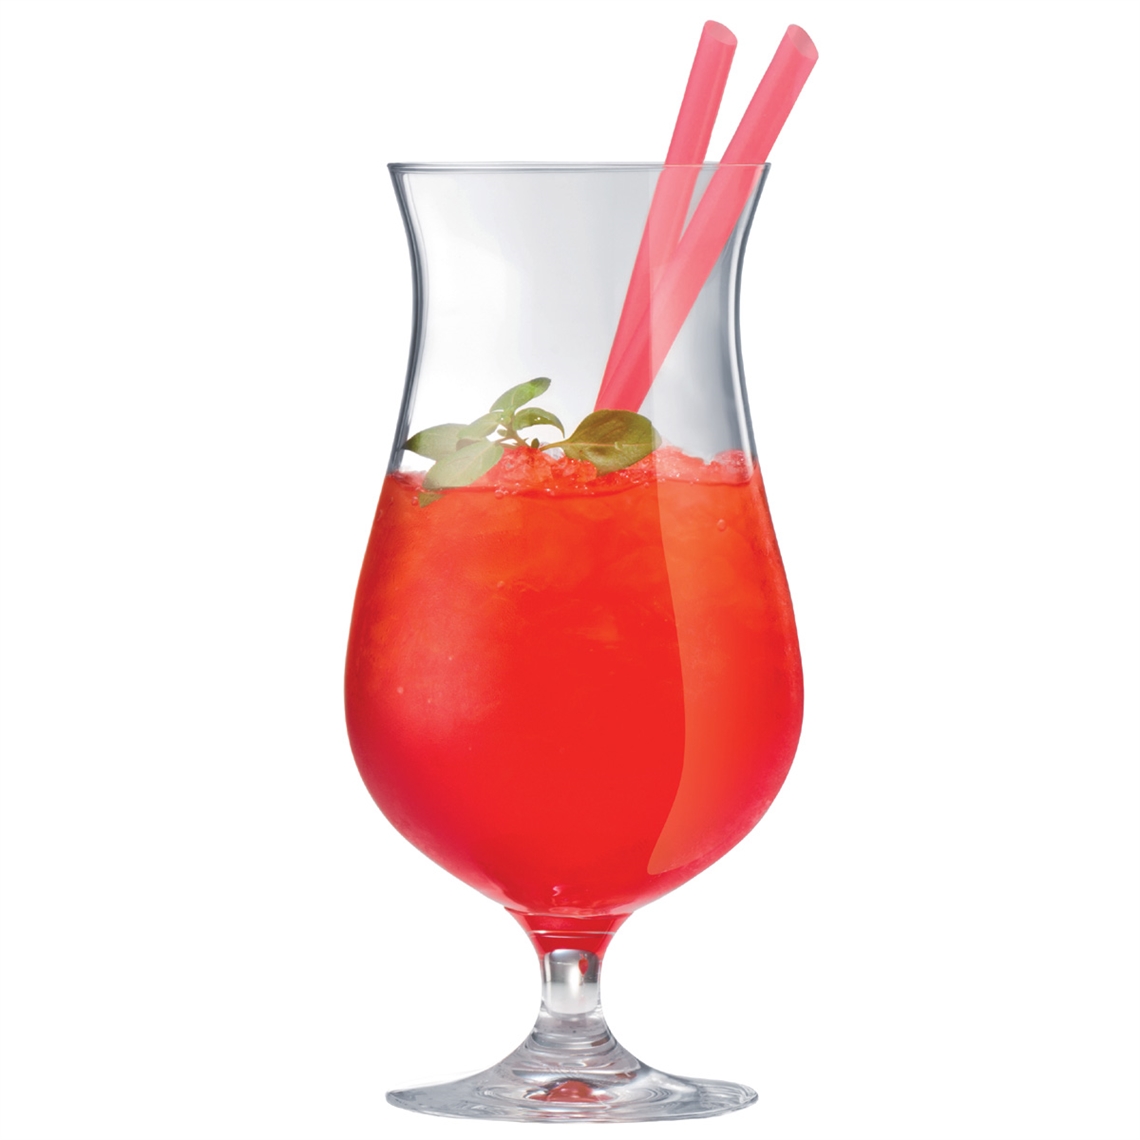 View more riedel vinum from our Cocktail Glasses range